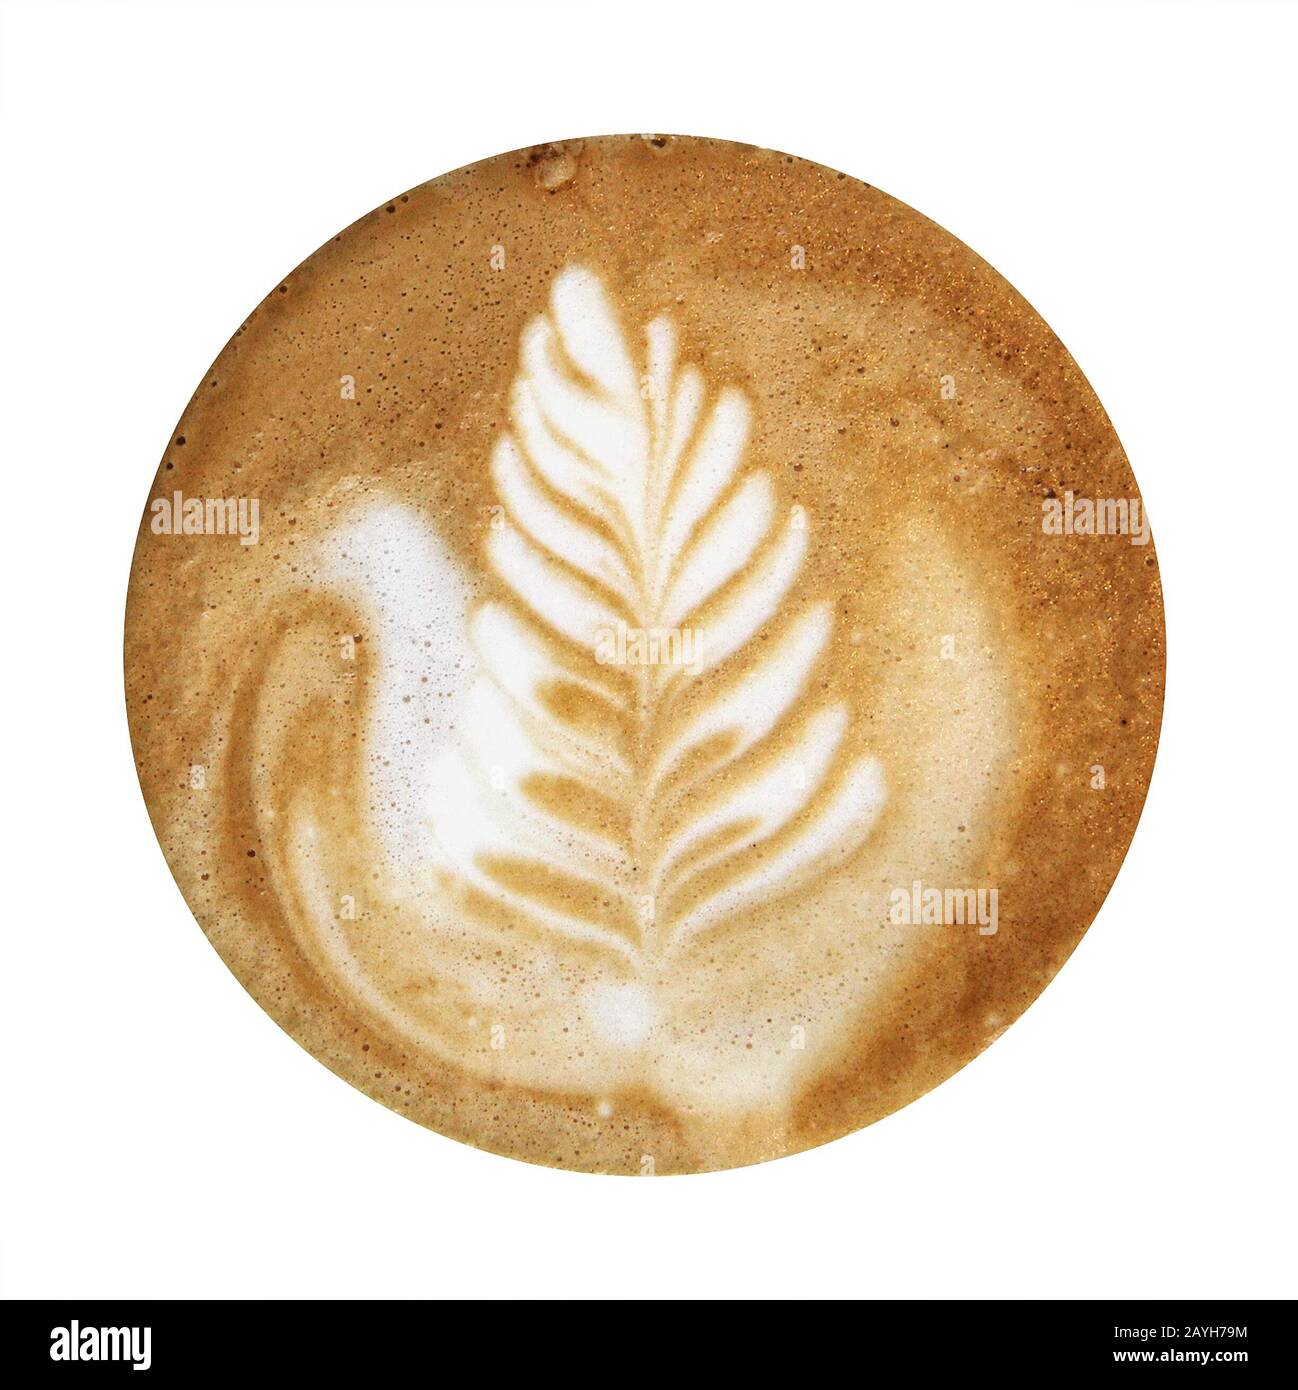 Closeup up of coffee latte foam with leaf design art isolated on a white background, viewed from top. Stock Photo